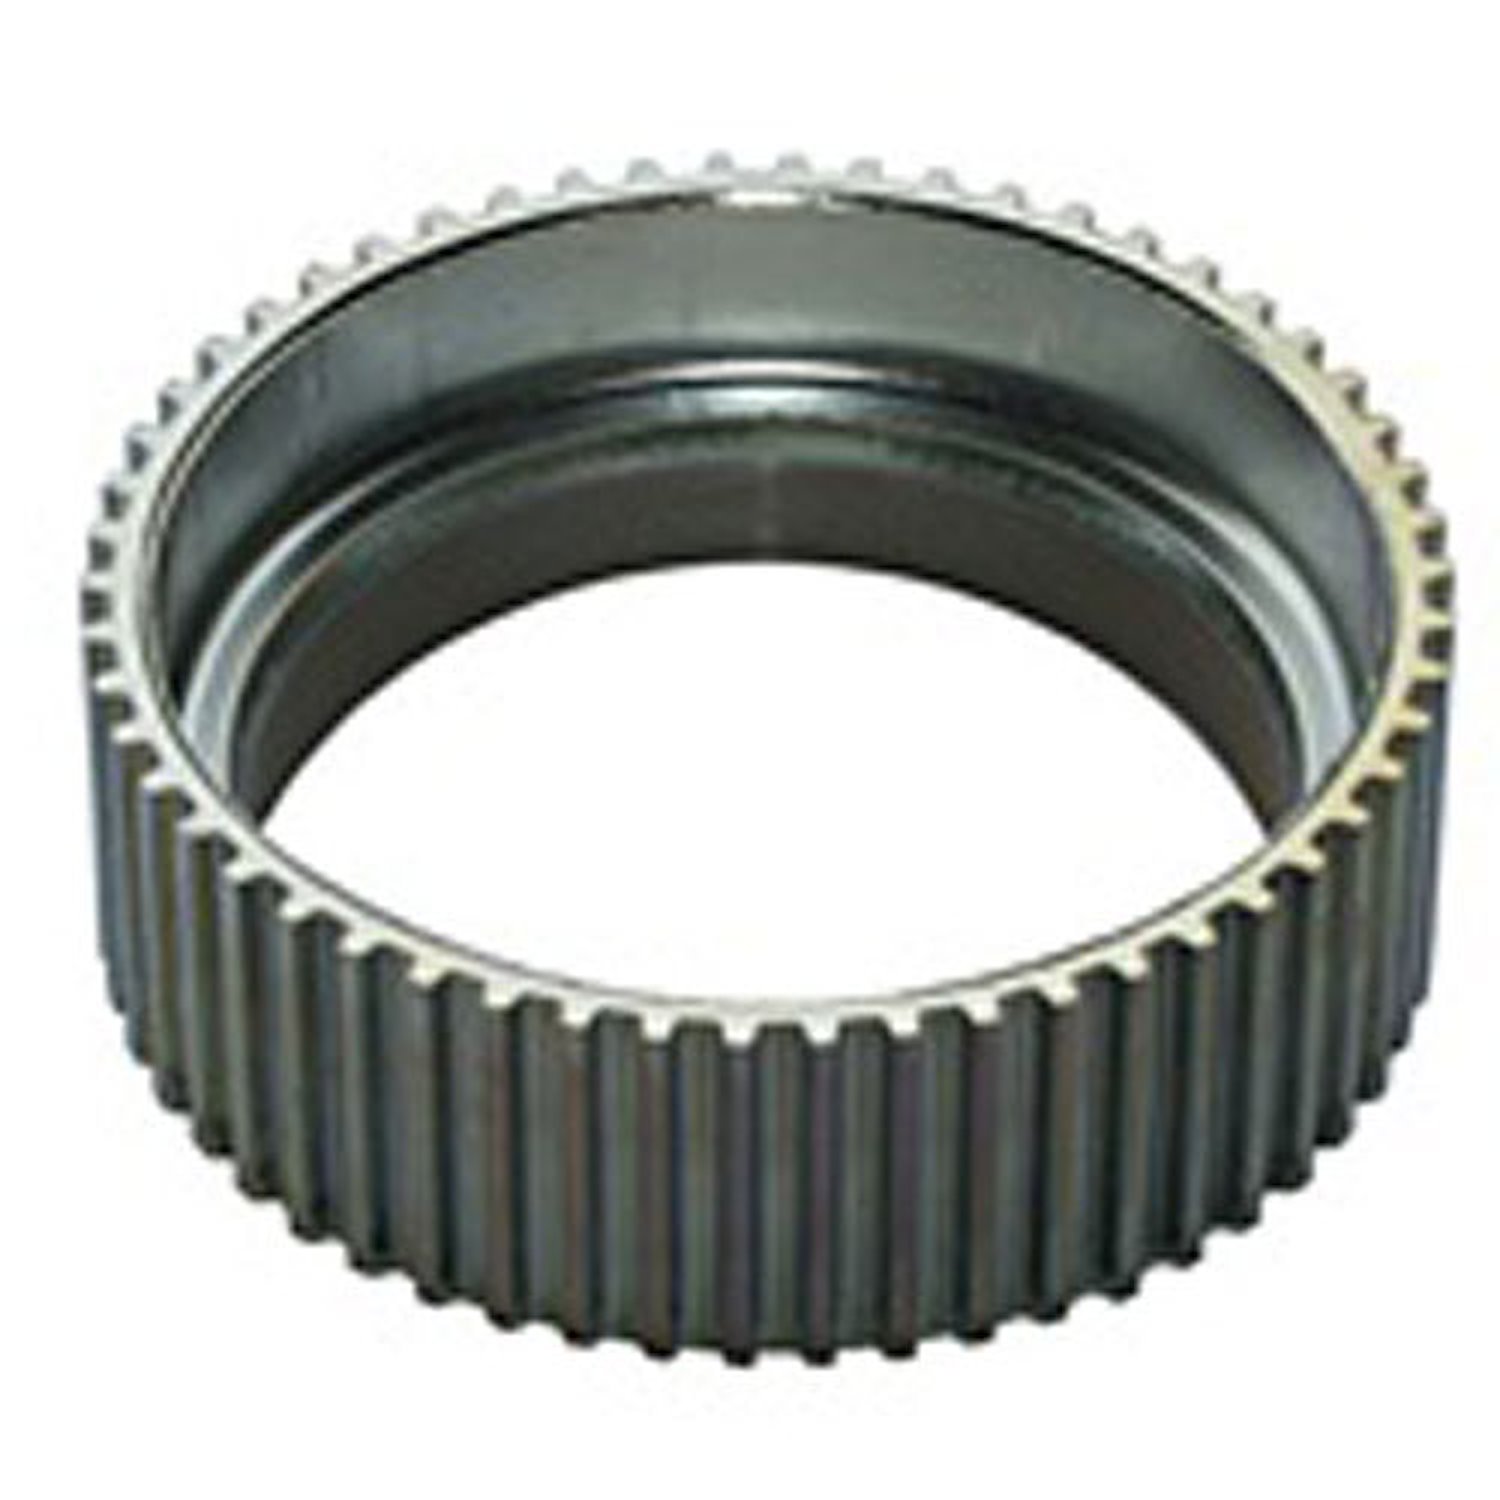 This ABS tone ring from Omix-ADA fits 92-01 Jeep Cherokees 97-98 Grand Cherokees and 97-06 Wrangler with Dana 30 front axle.